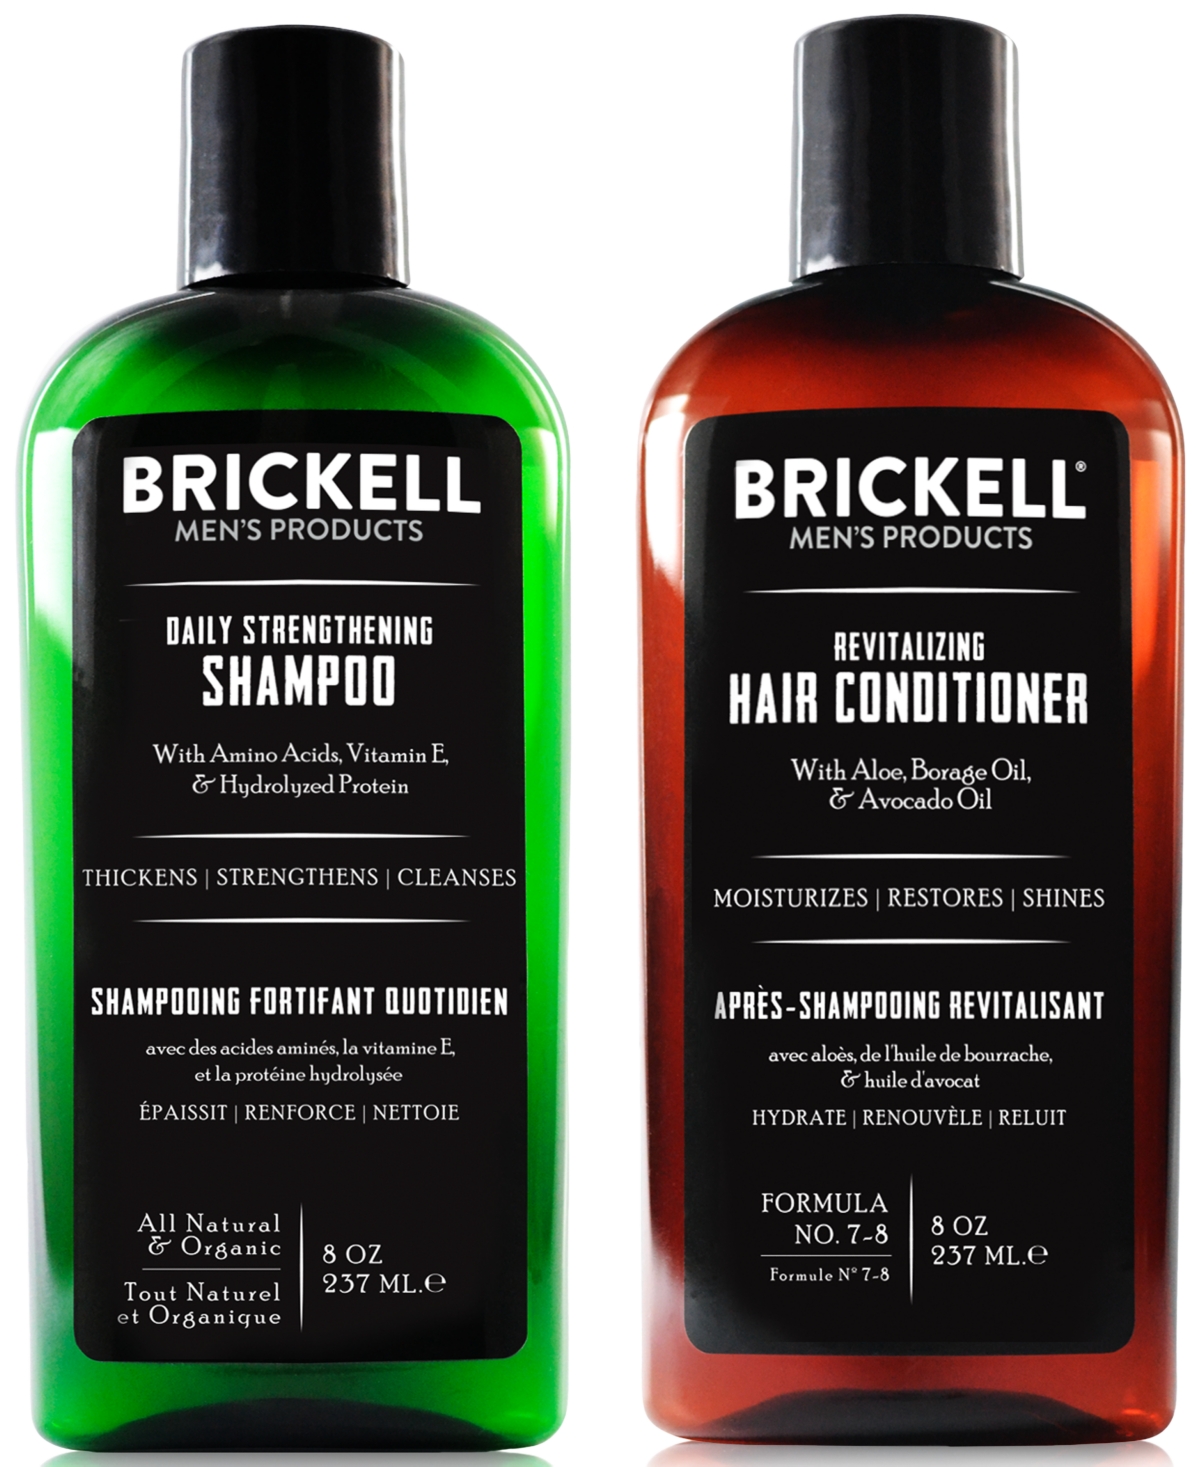 Brickell Men's Products 2-Pc. Men's Daily Revitalizing Hair Care Set